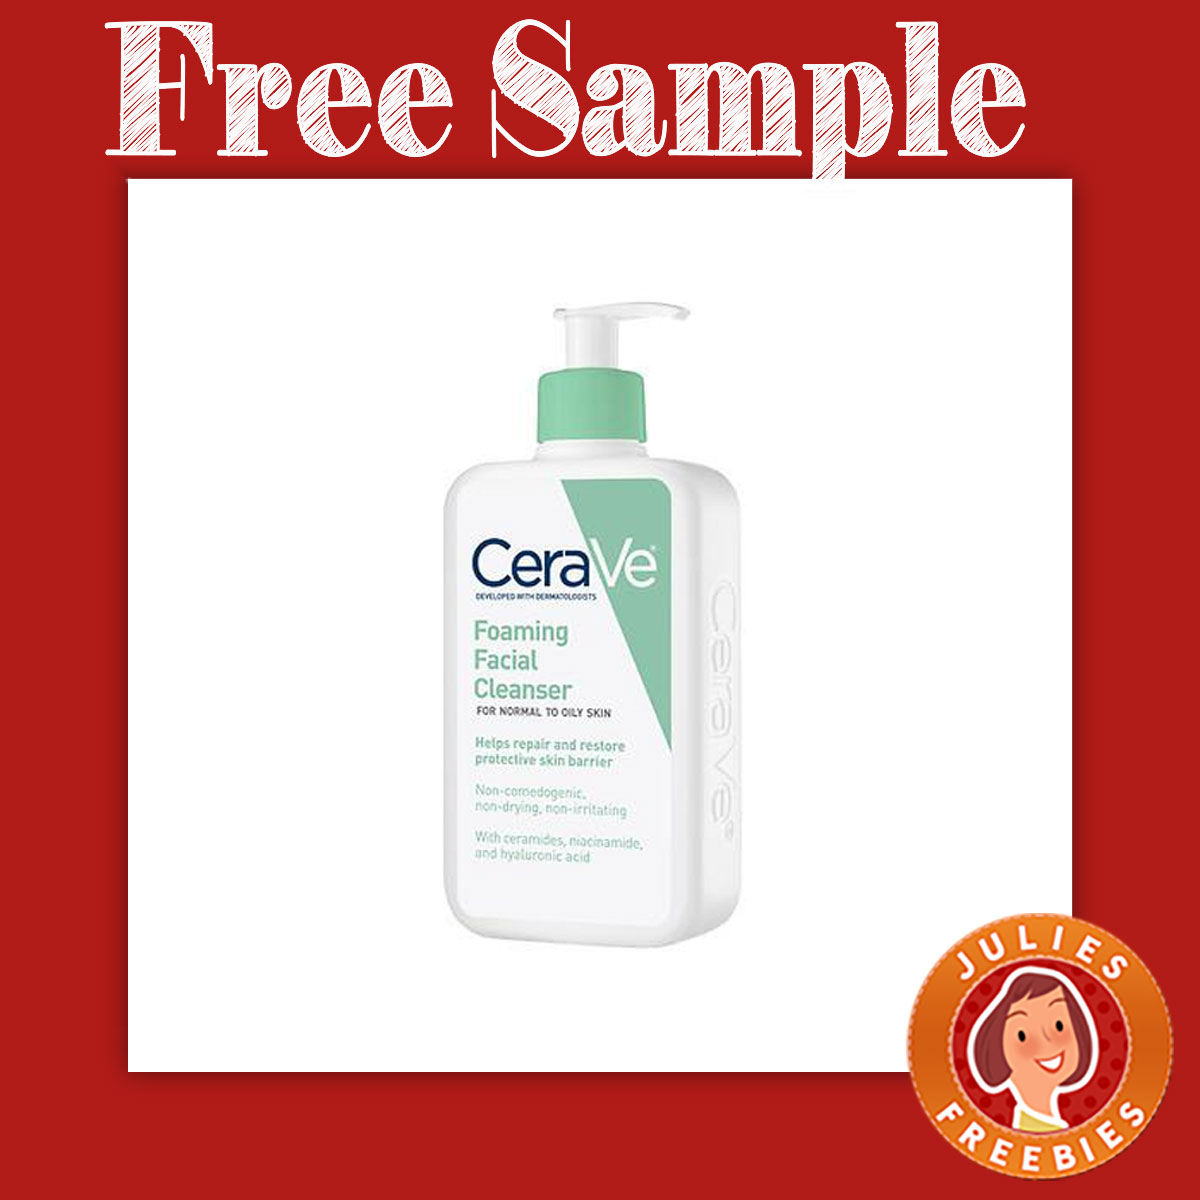 Free Sample of CeraVe Facial Cleanser at Walgreens - Julie's Freebies